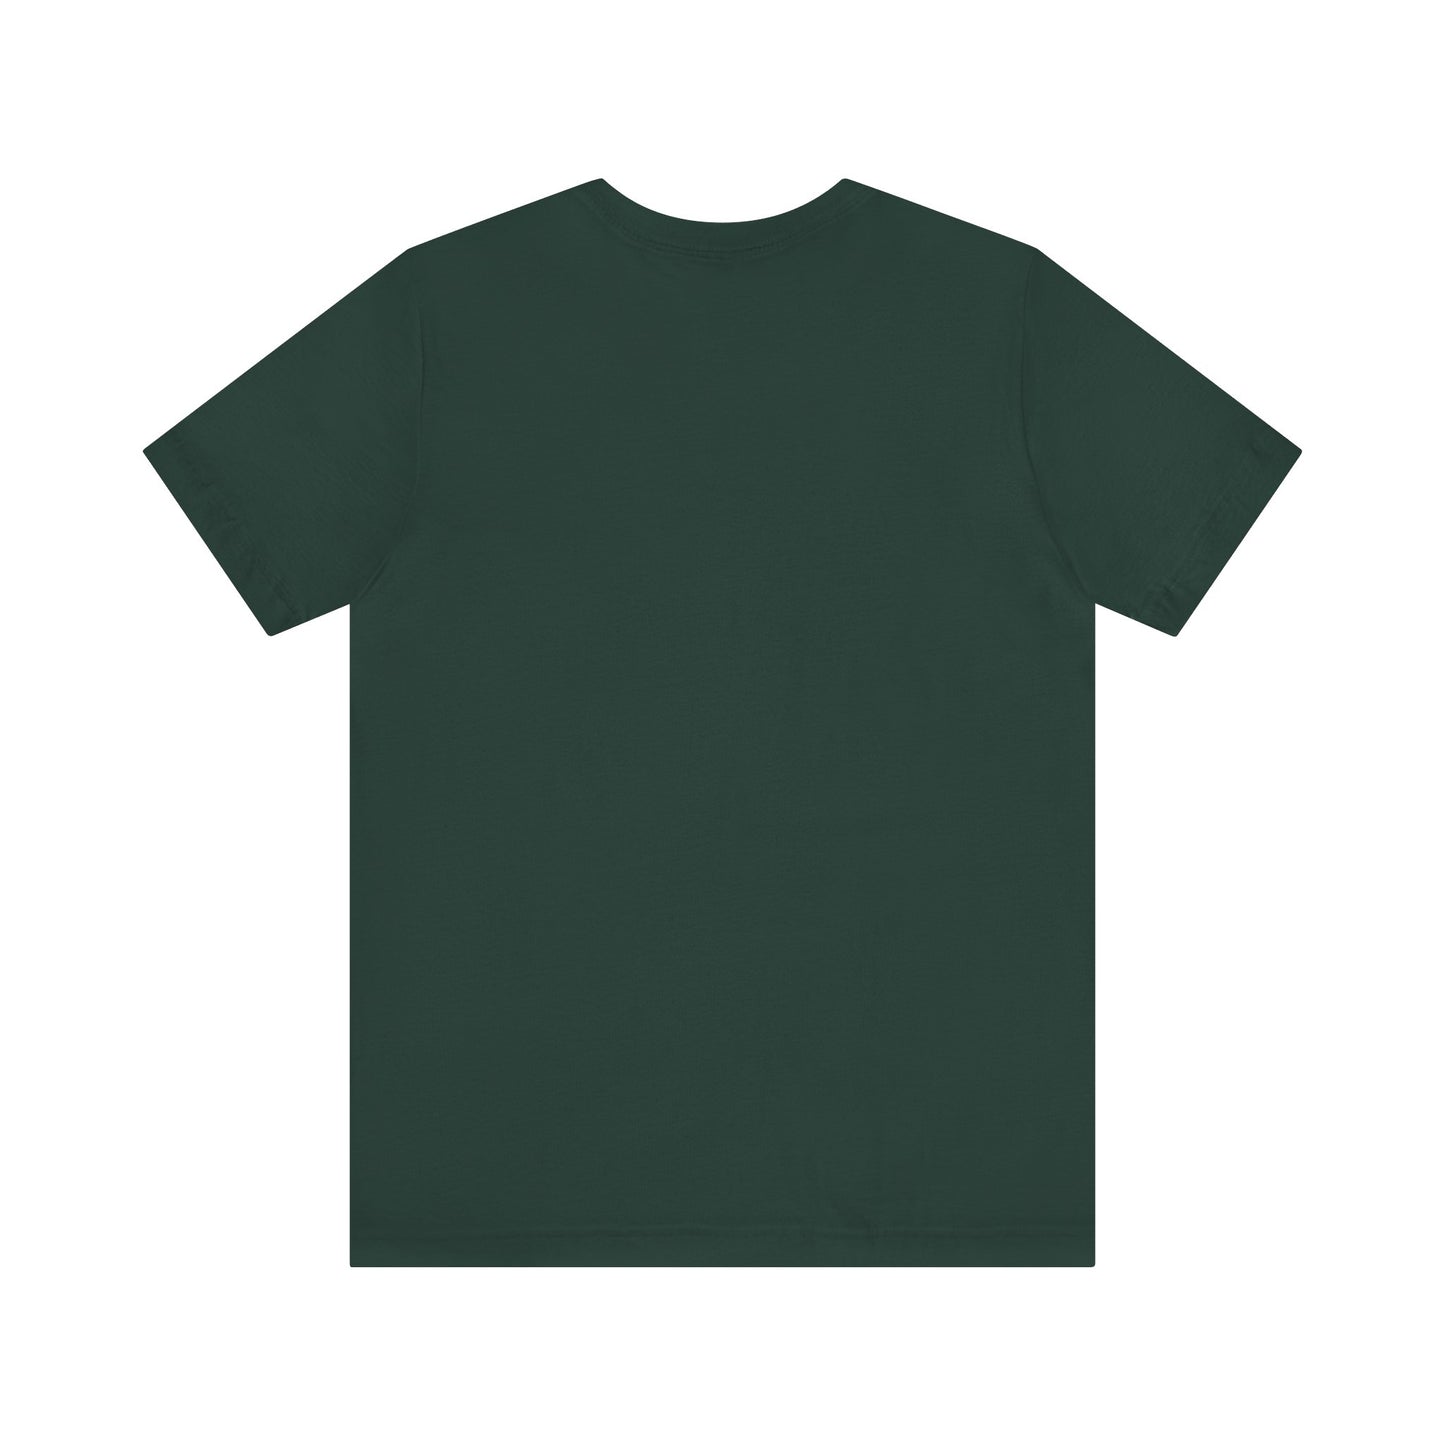 DISCIPLE OF JESUS CHRIST Tee in Forest Green